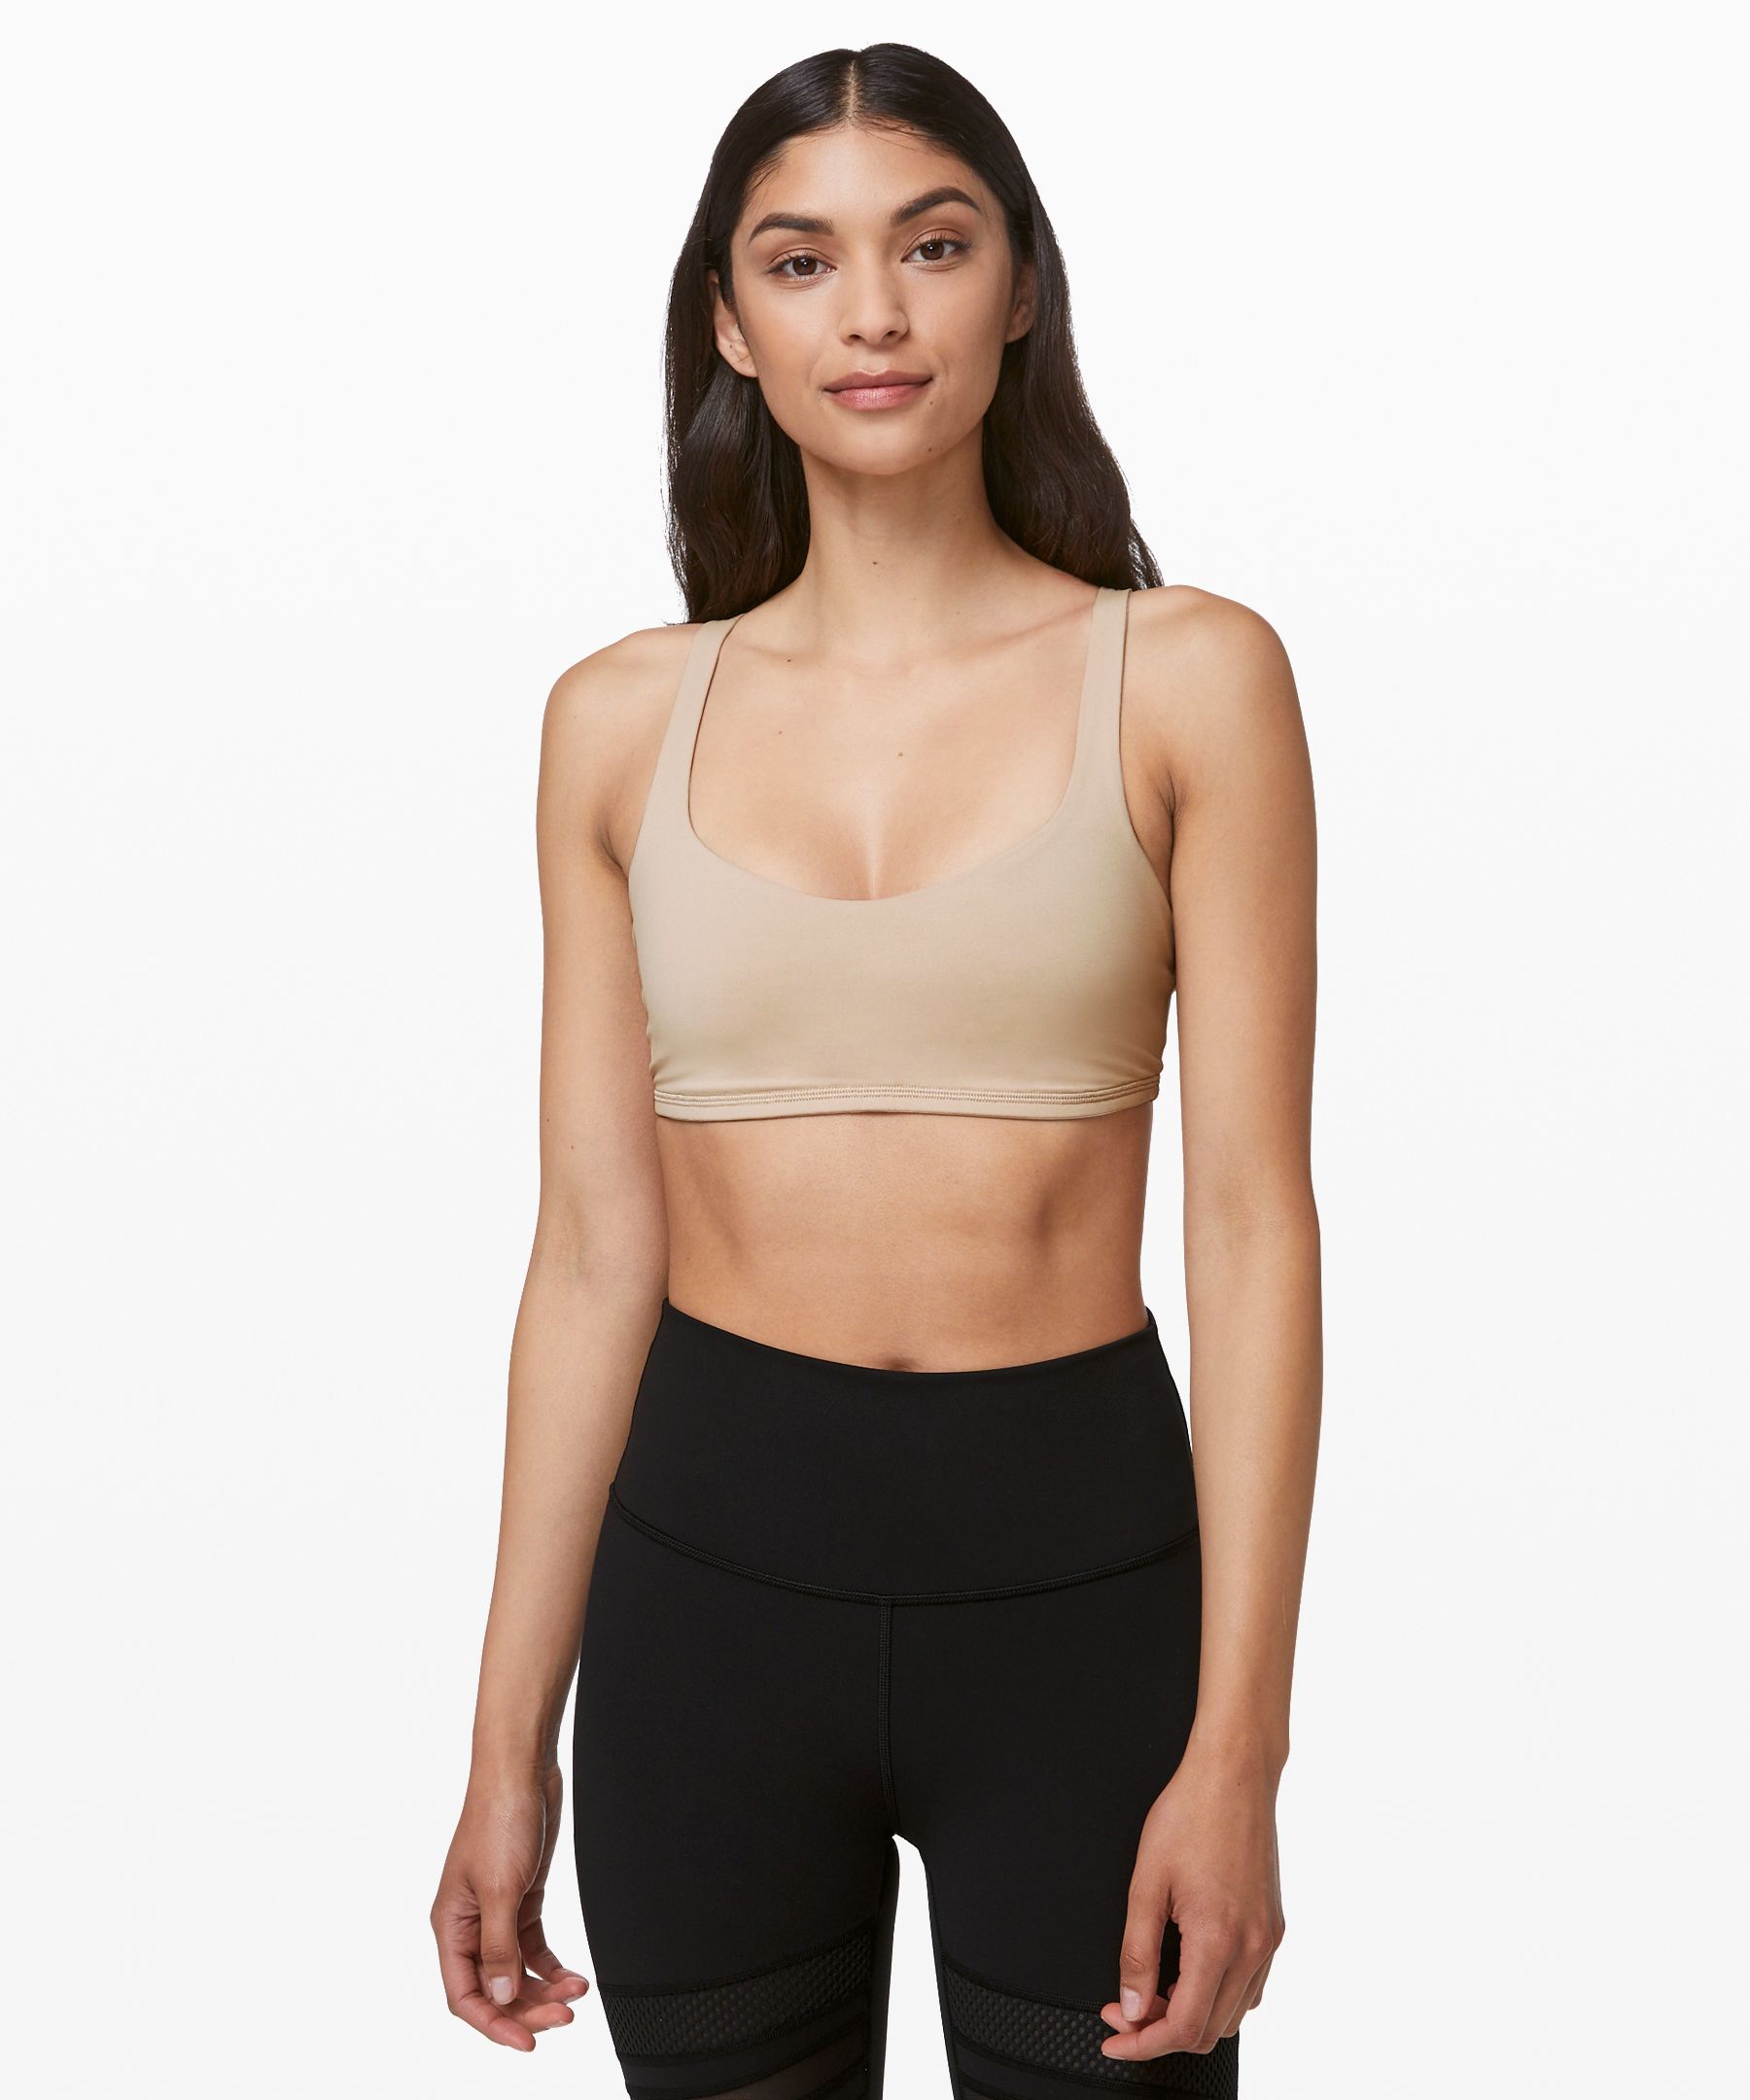 Free To Be Bra*Light Support, A/B Cup 